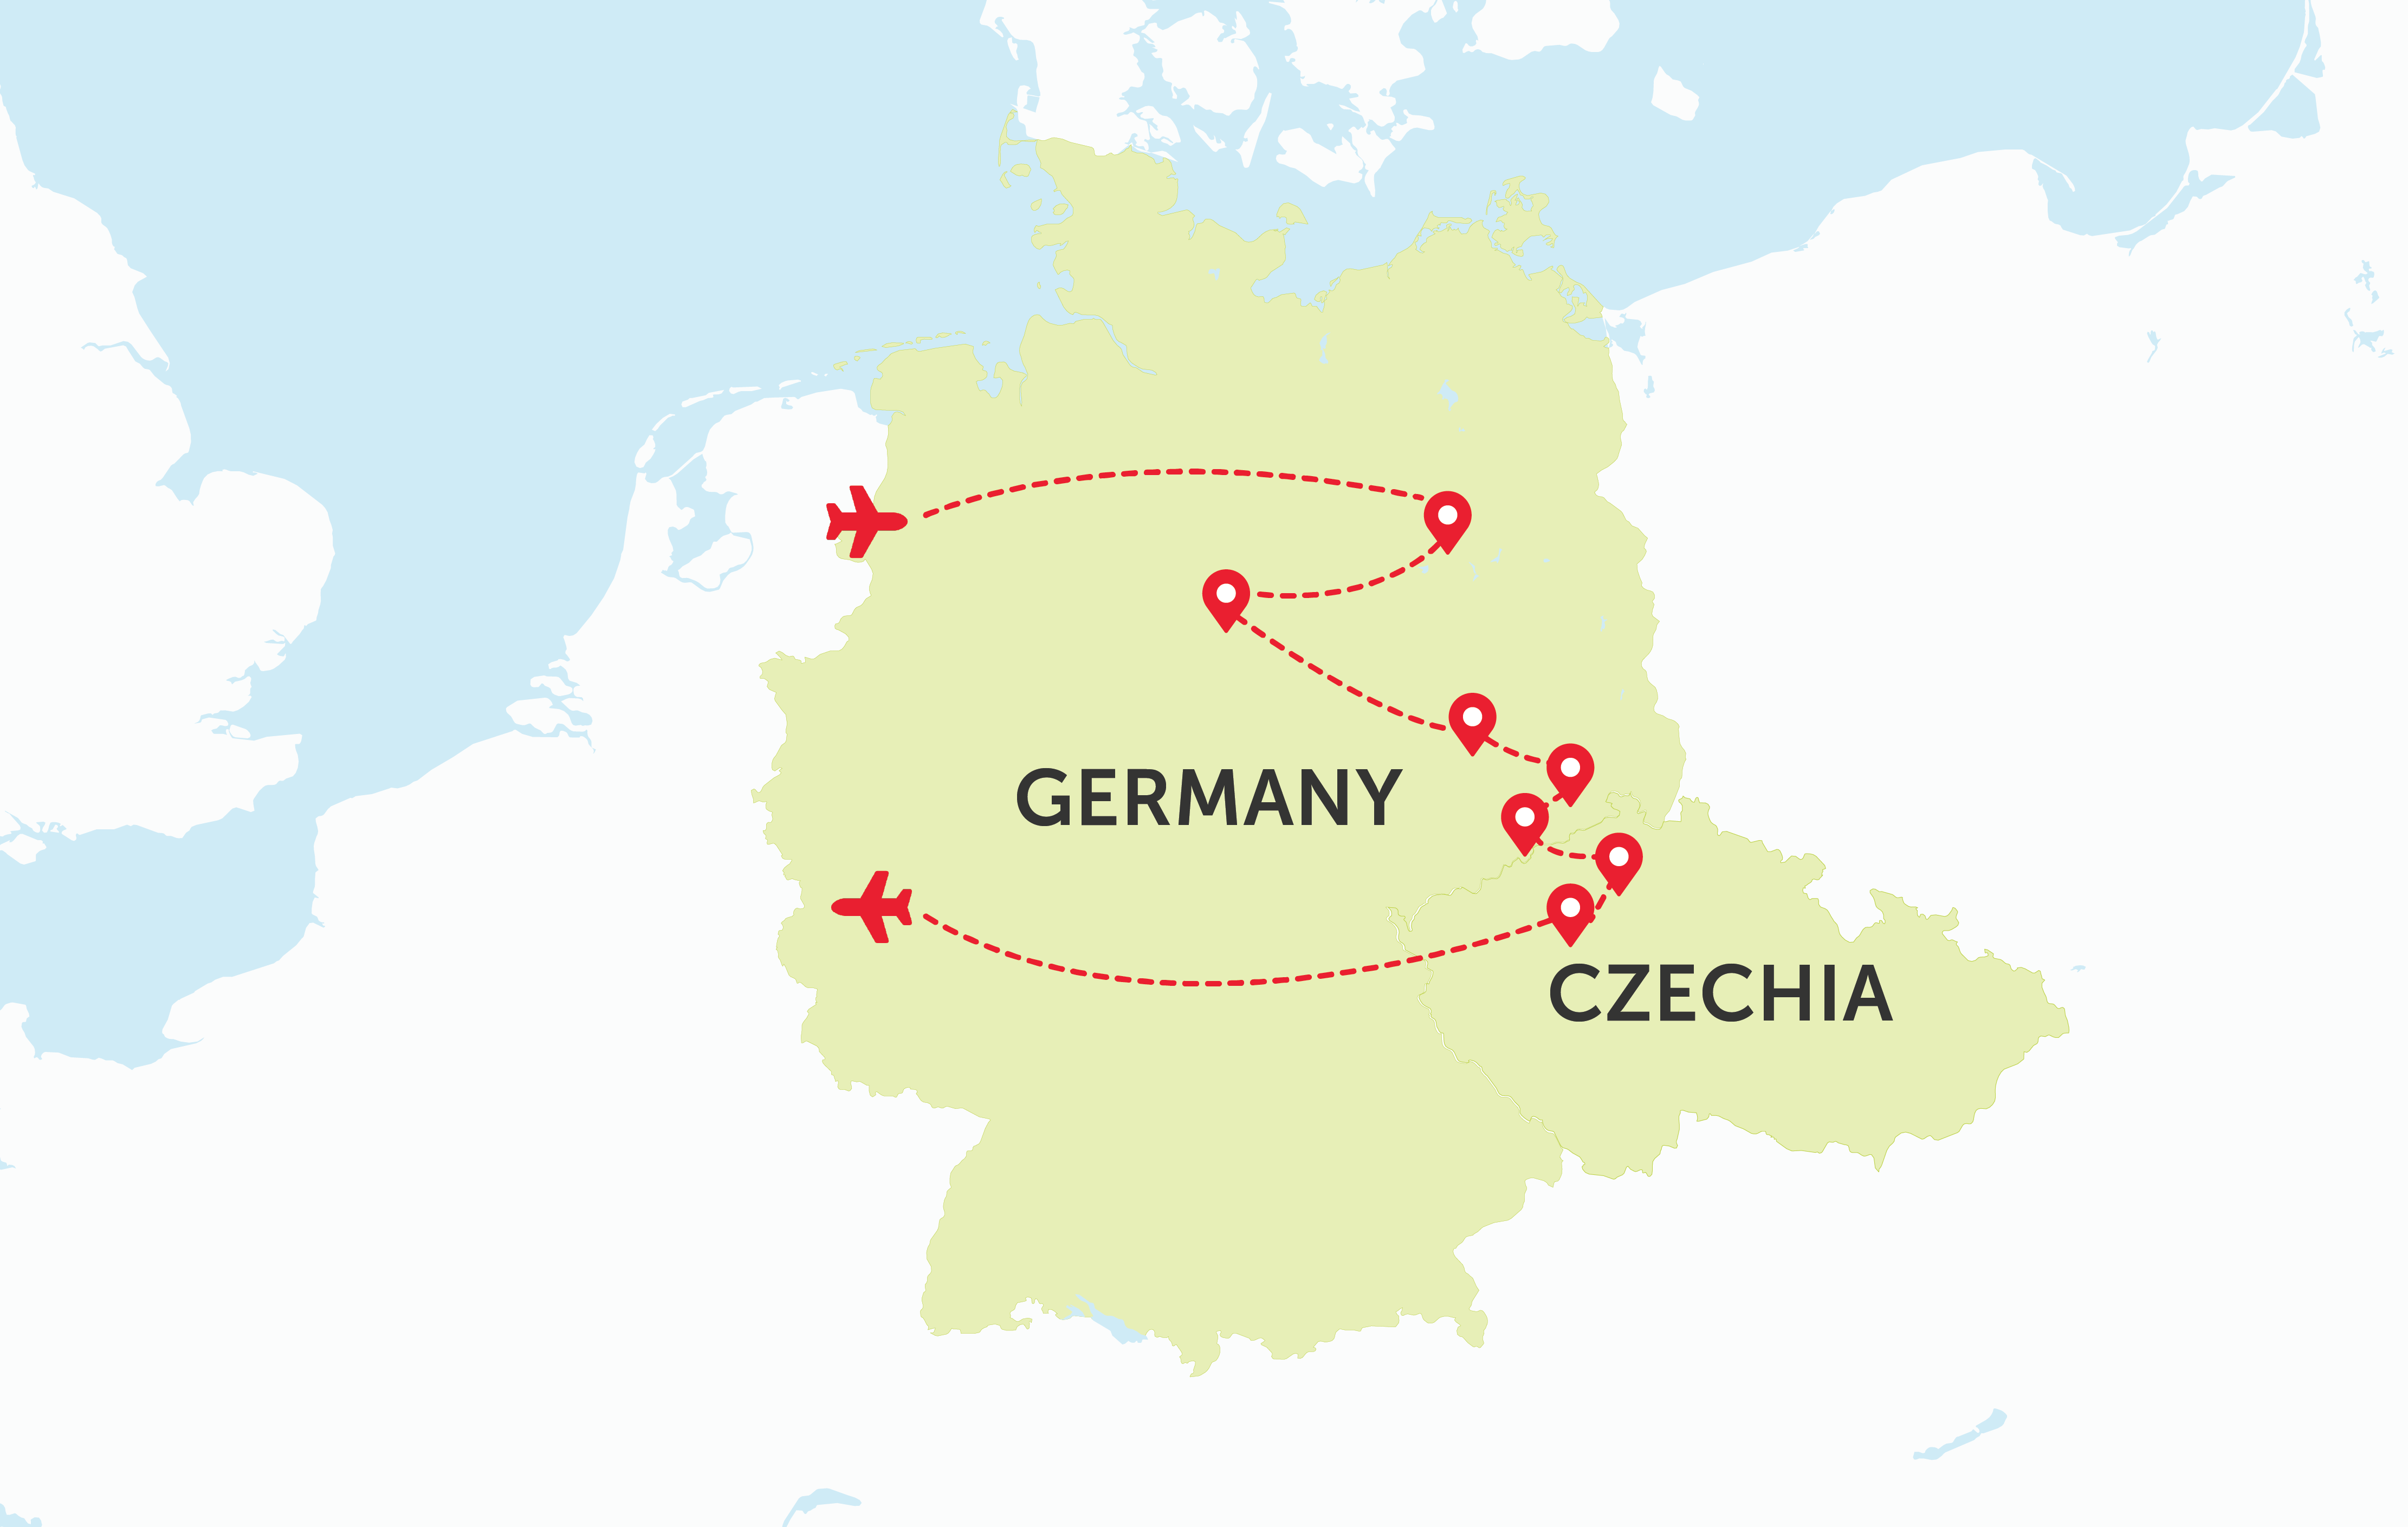 Germany and Czechia map